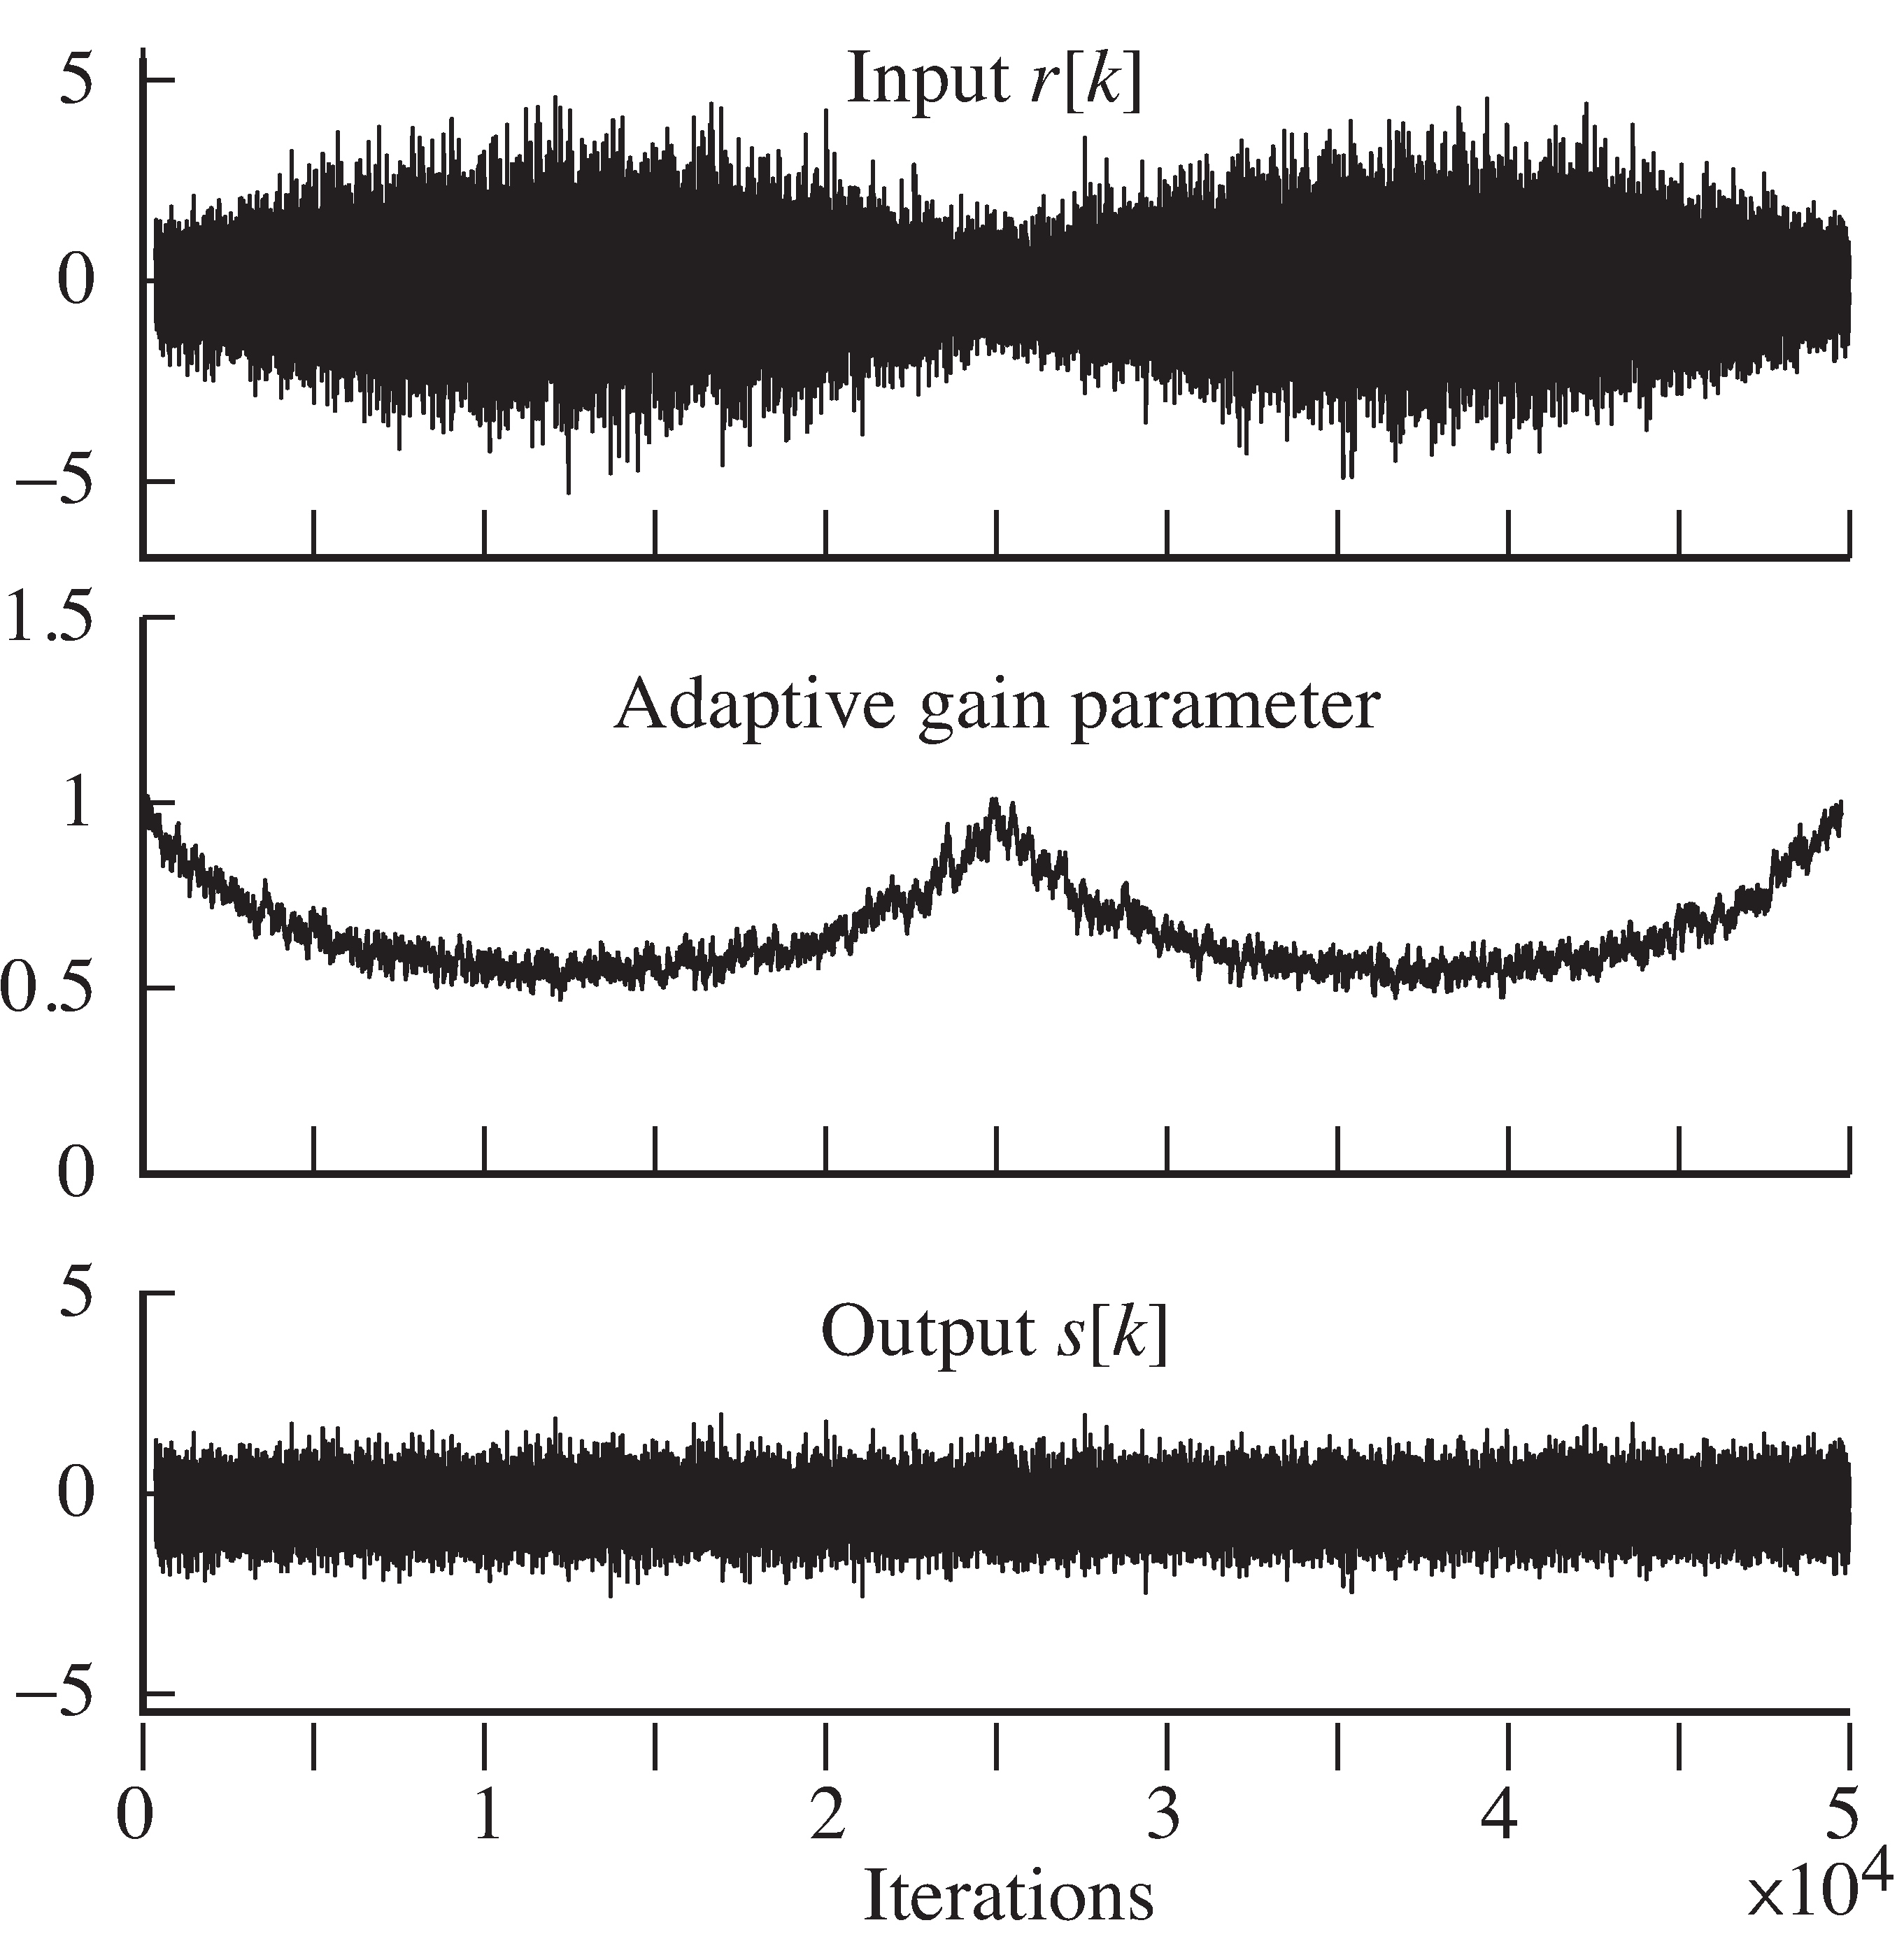 When the signal fades (top), the adaptive parameter compensates (middle), allowing the output to maintain nearly constant power (bottom).